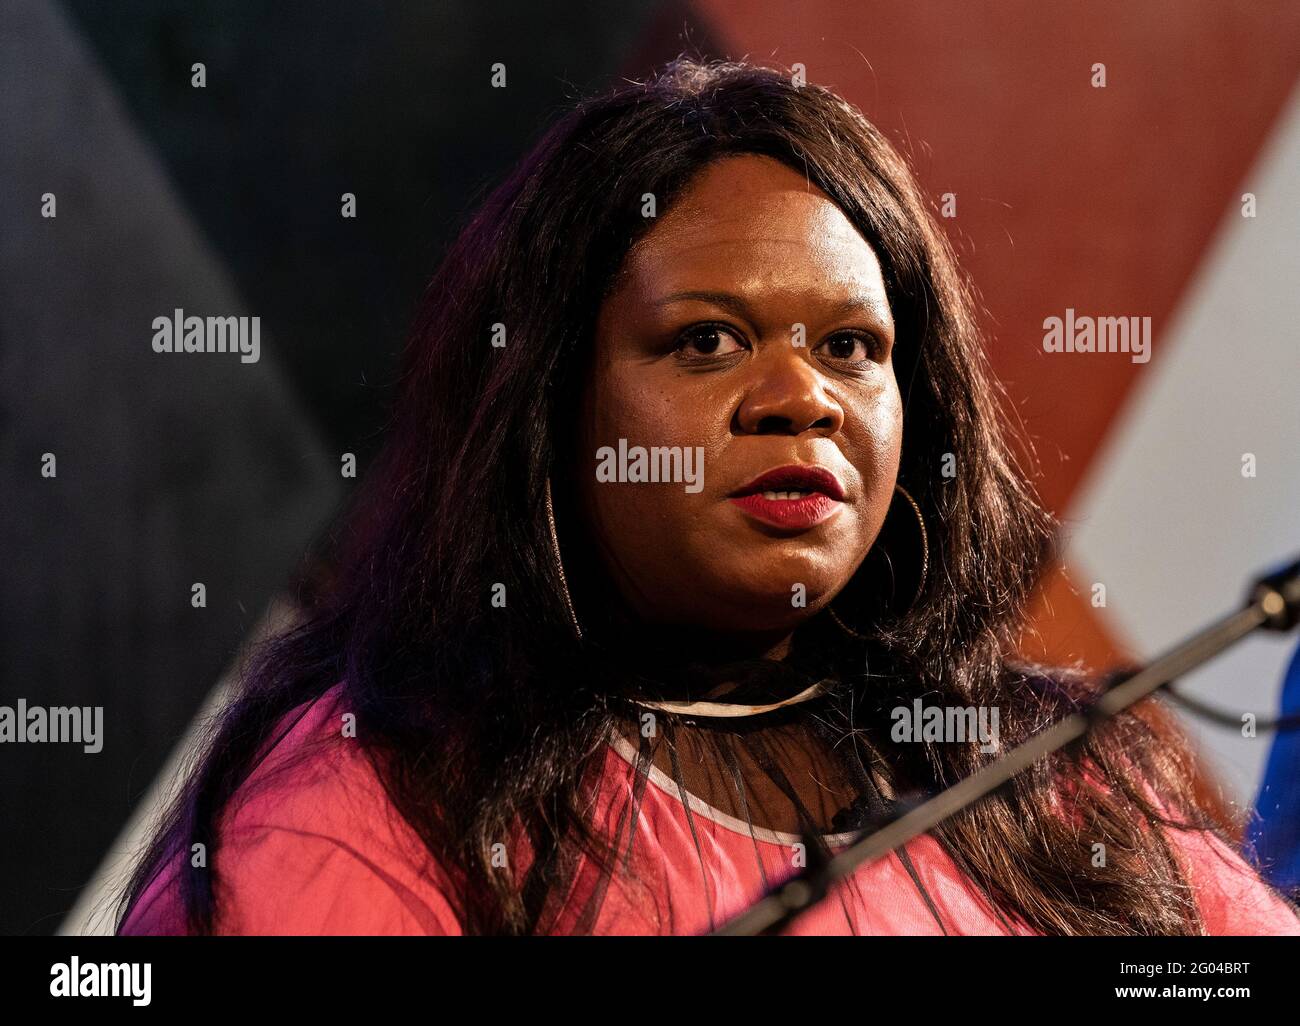 New York, United States. 31st May, 2021. Comedian Yamaneika Saunders speaks at Carolines on Broadway comedy club re-opening after pandemic ceremony in New York on May 31, 2021. (Photo by Lev Radin/Sipa USA) Credit: Sipa USA/Alamy Live News Stock Photo